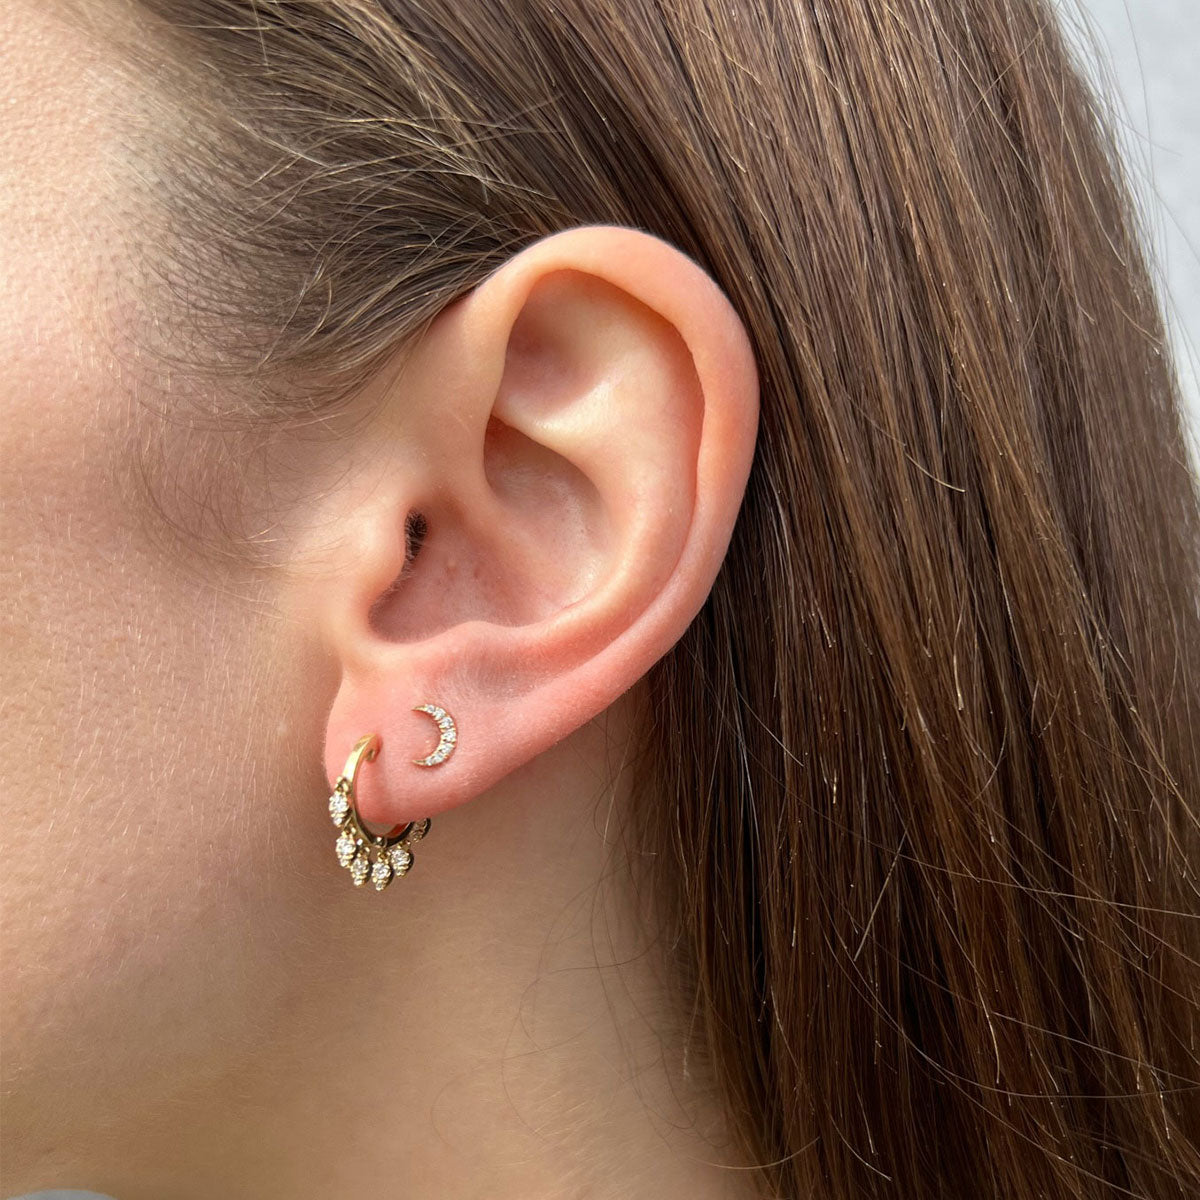 Diamond Mini Moon Stud Earring in 14k yellow gold styled on second earring hole on ear lobe of model with brown hair